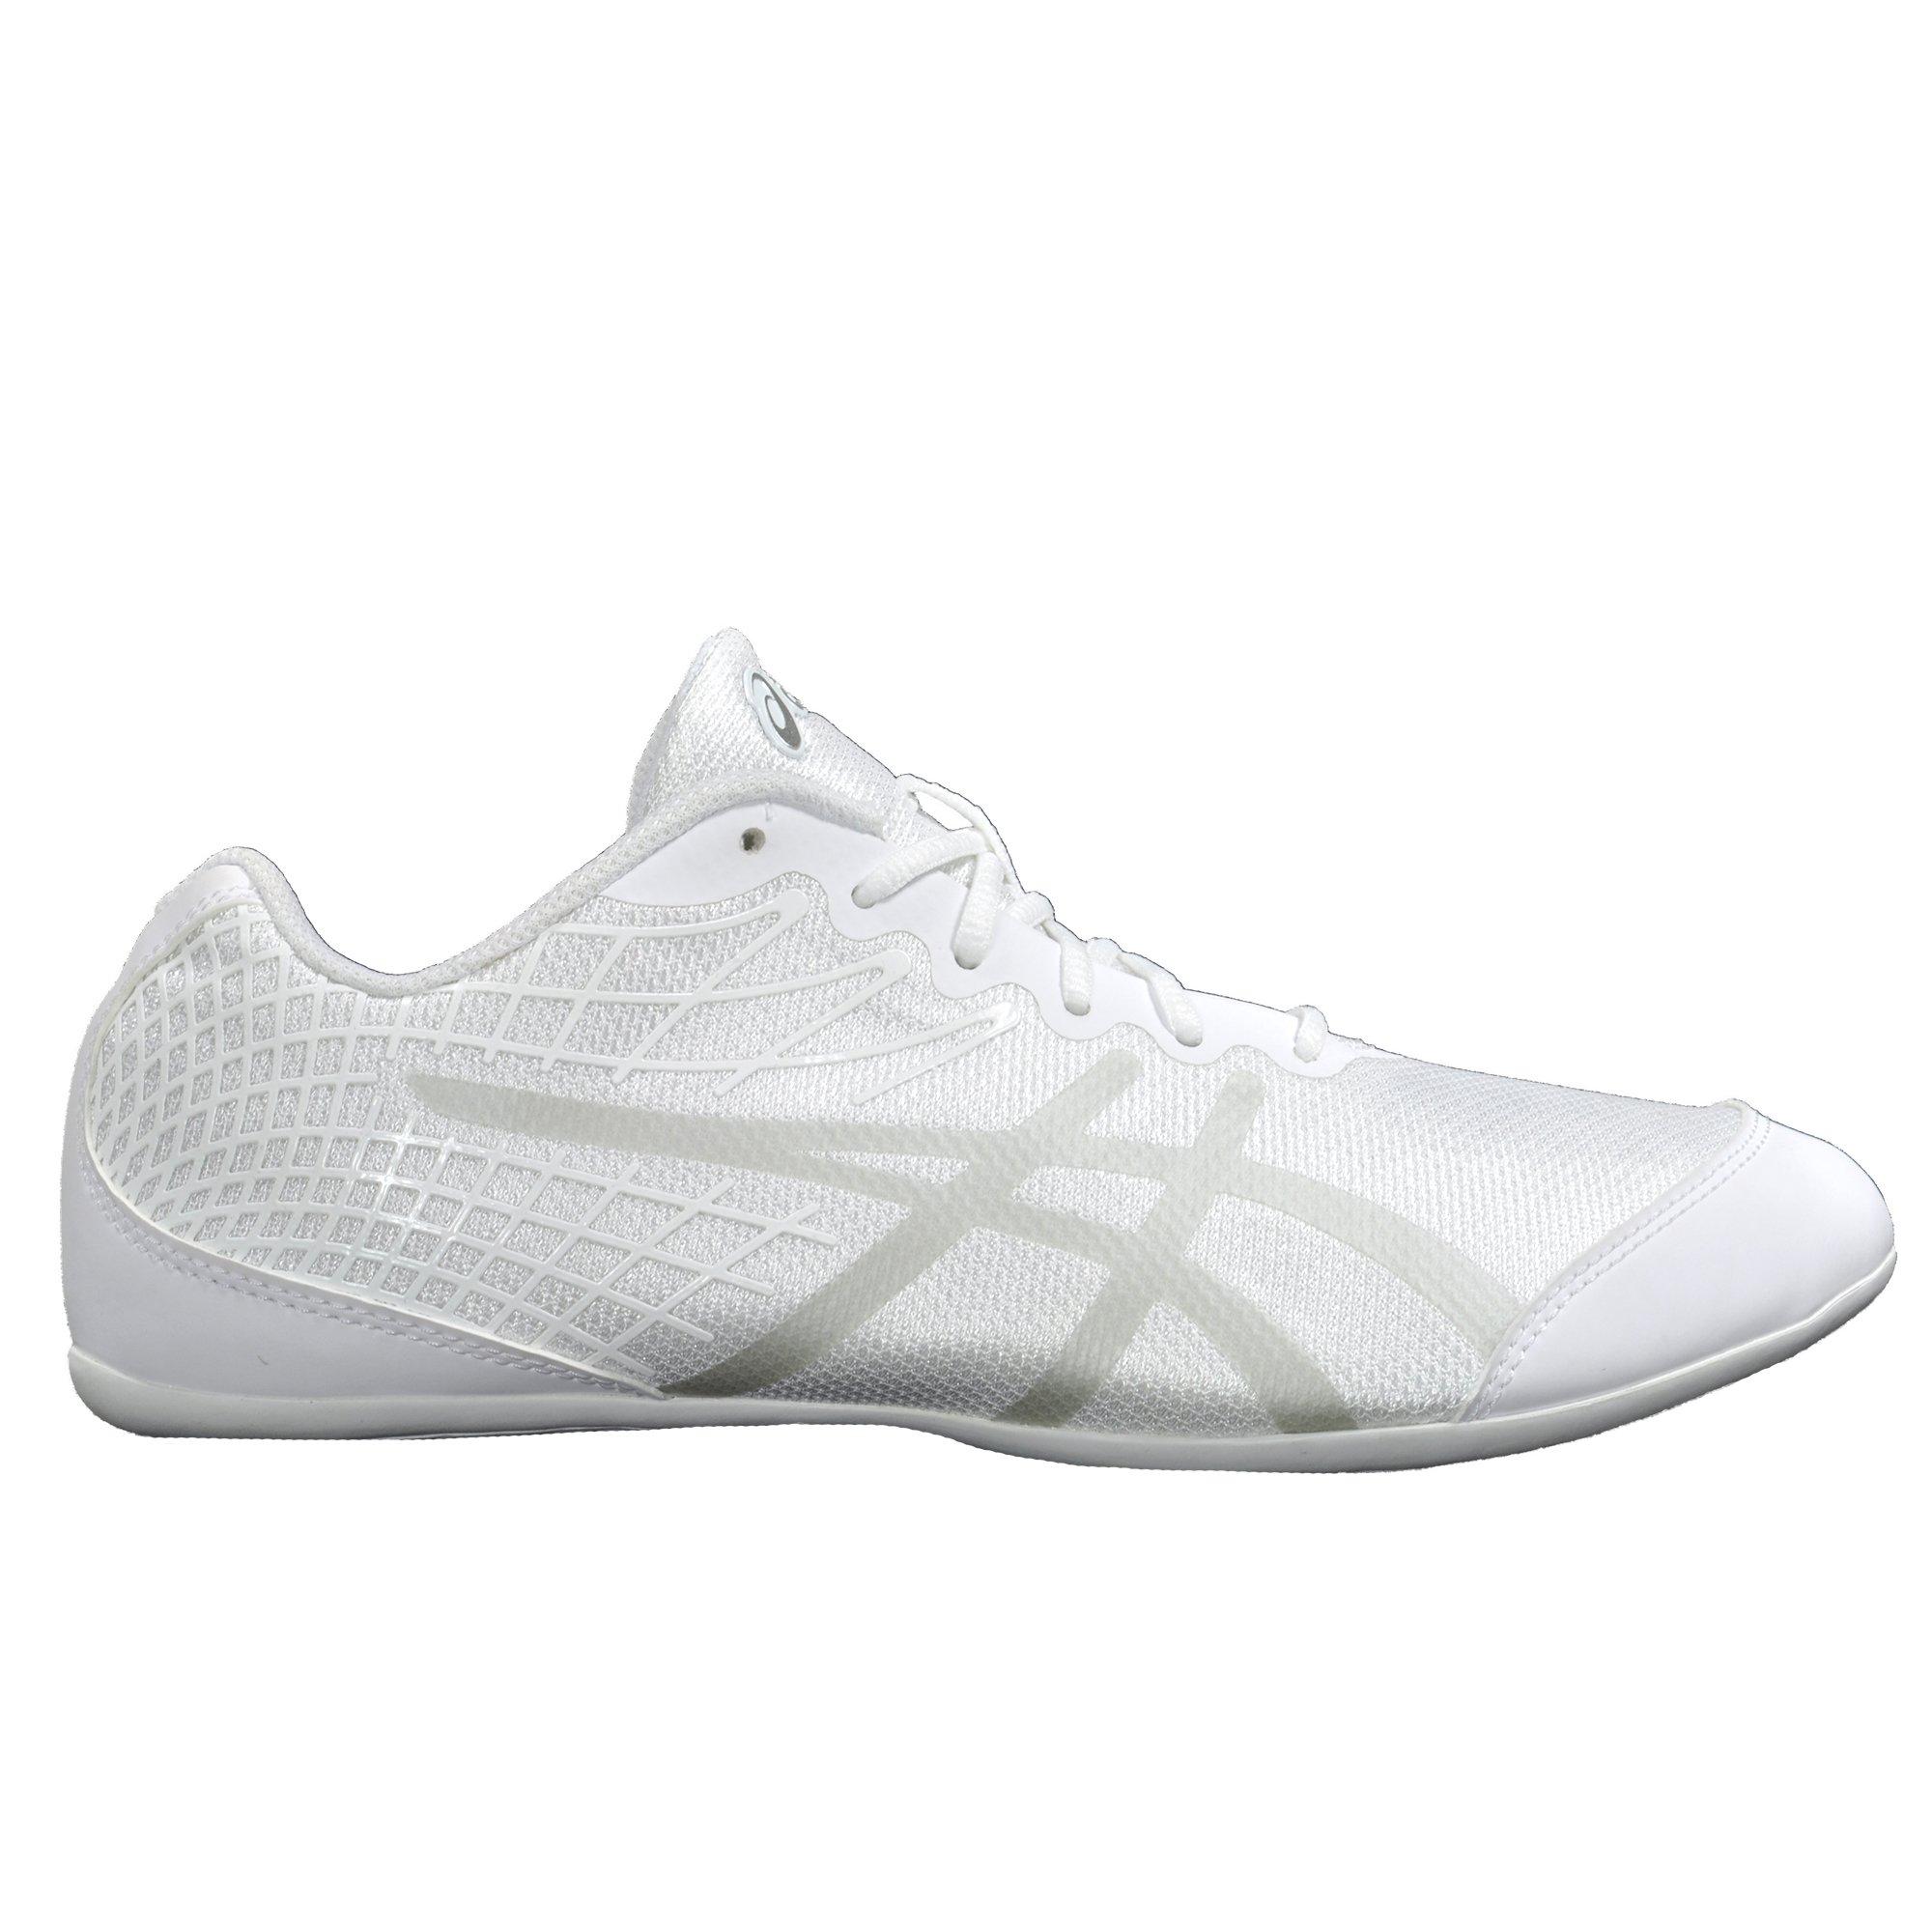 asics cheer shoes